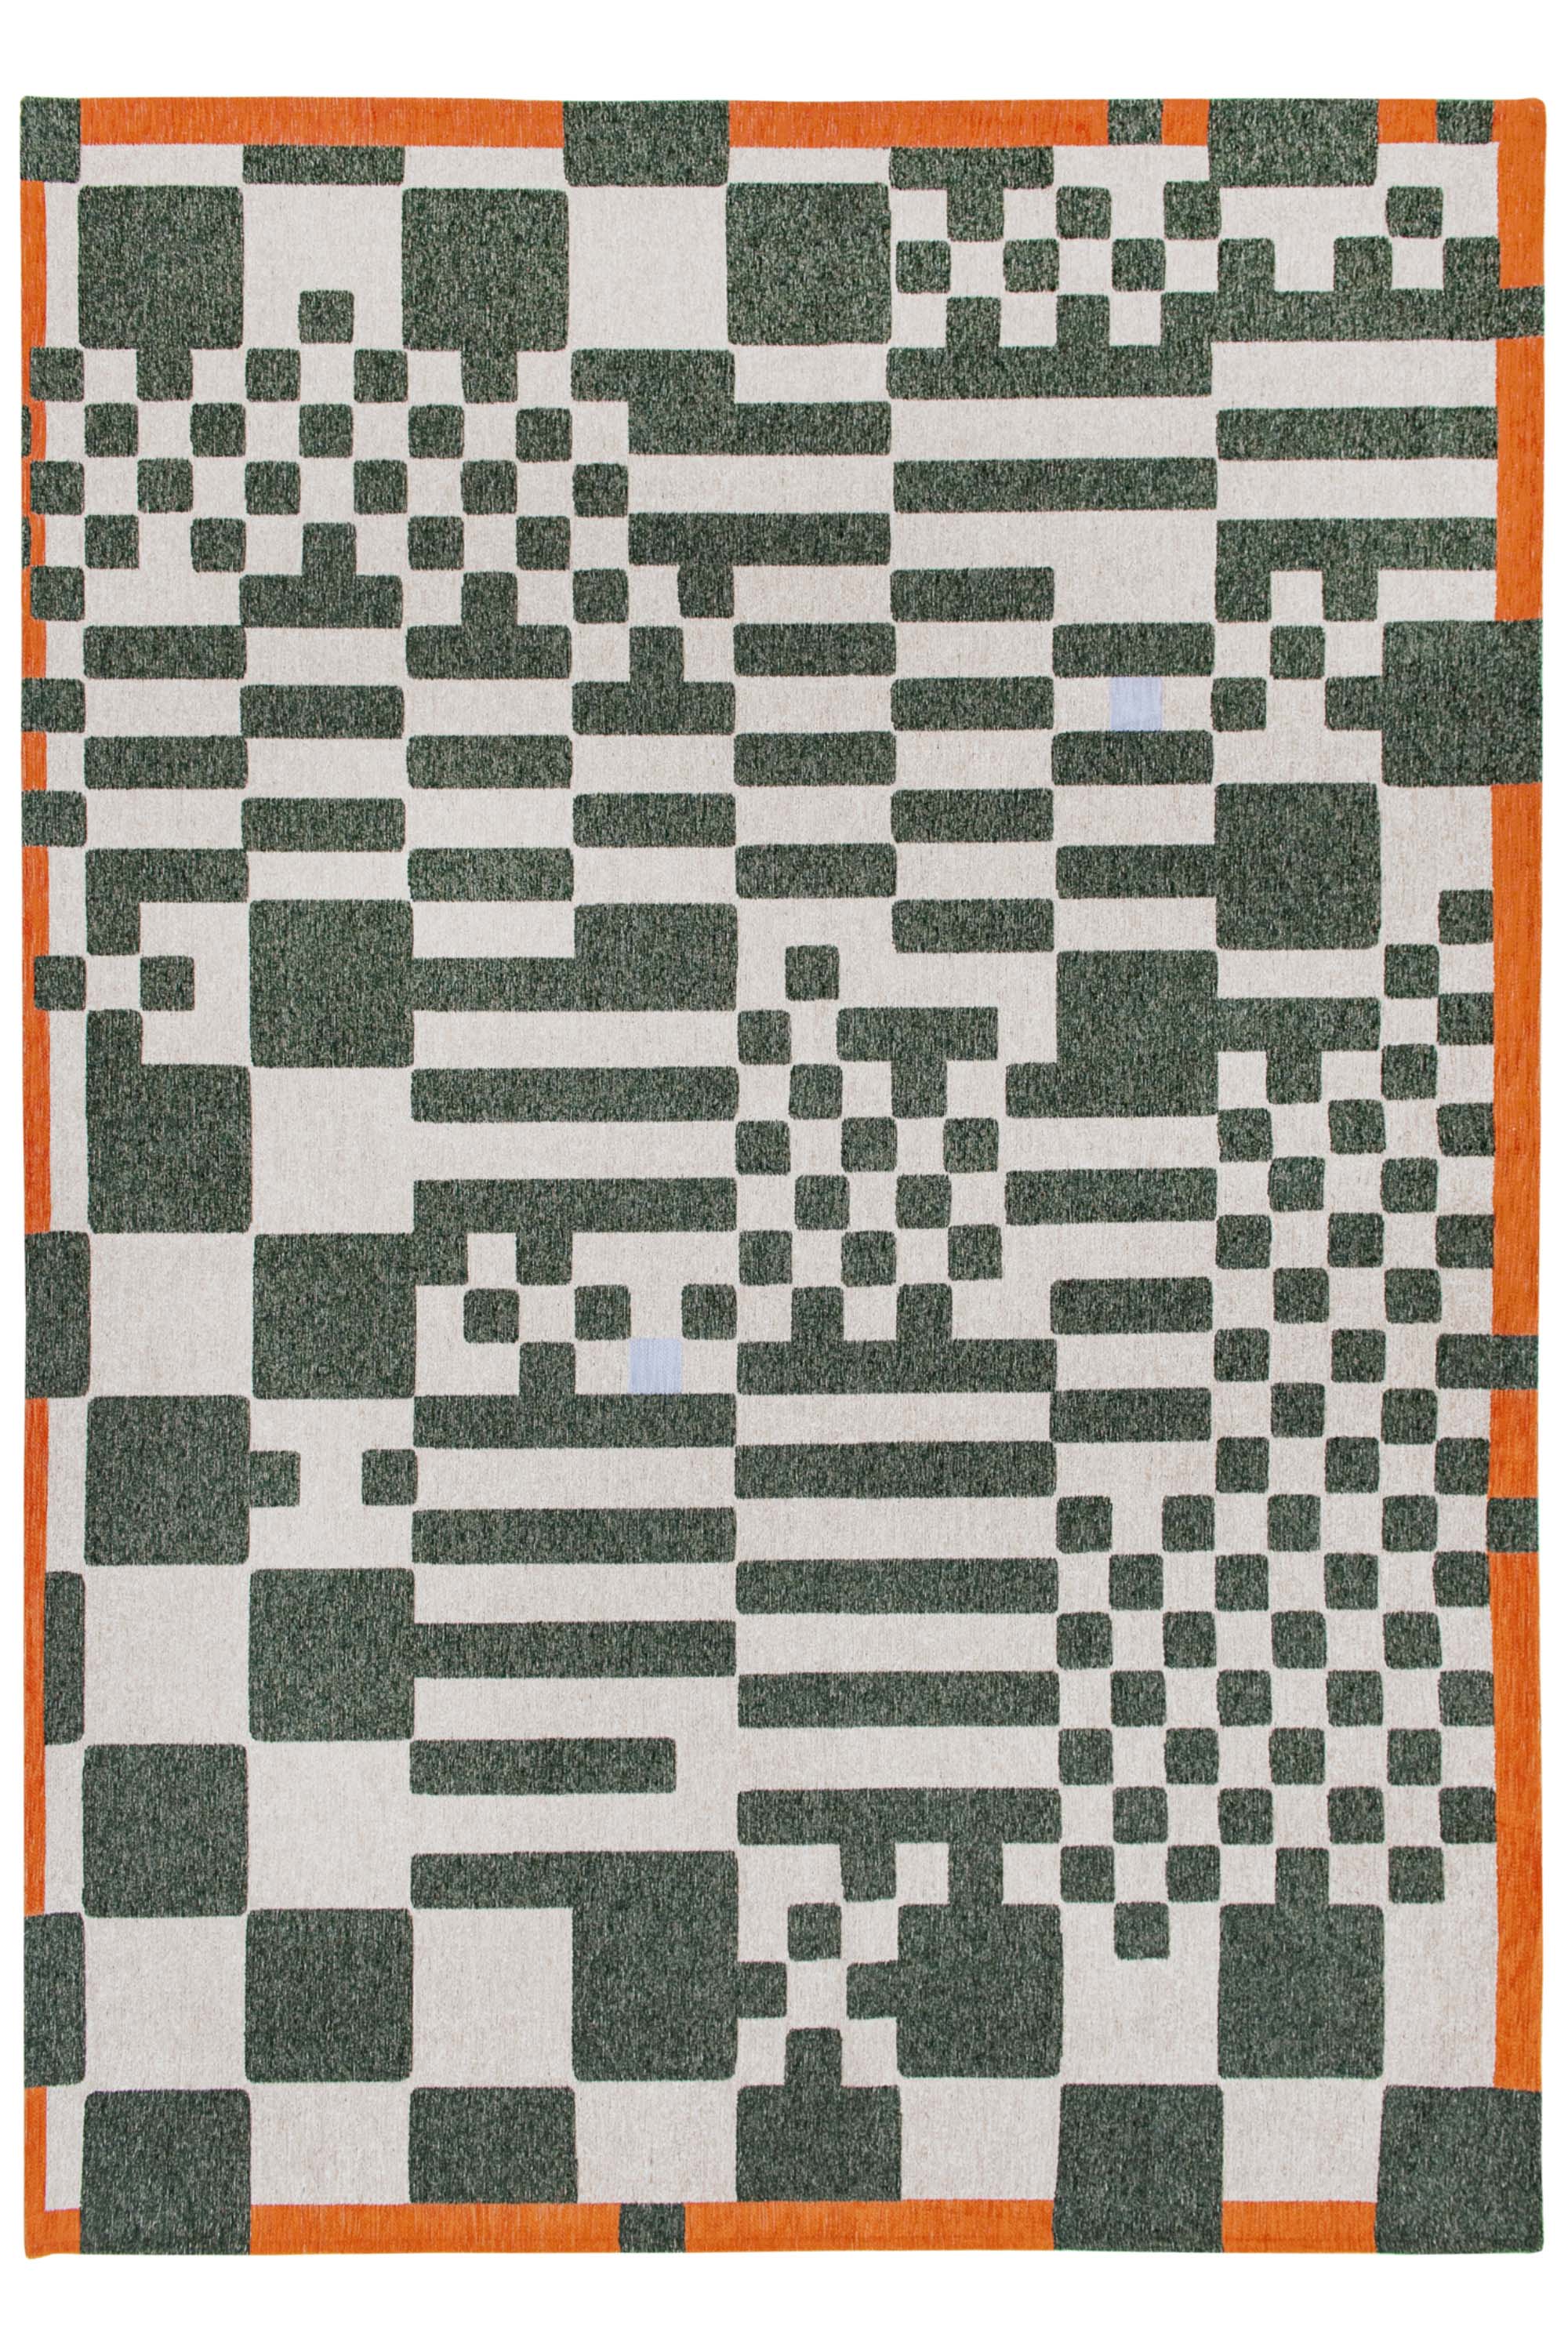 Abstract geometric rug with green, orange, and white tones